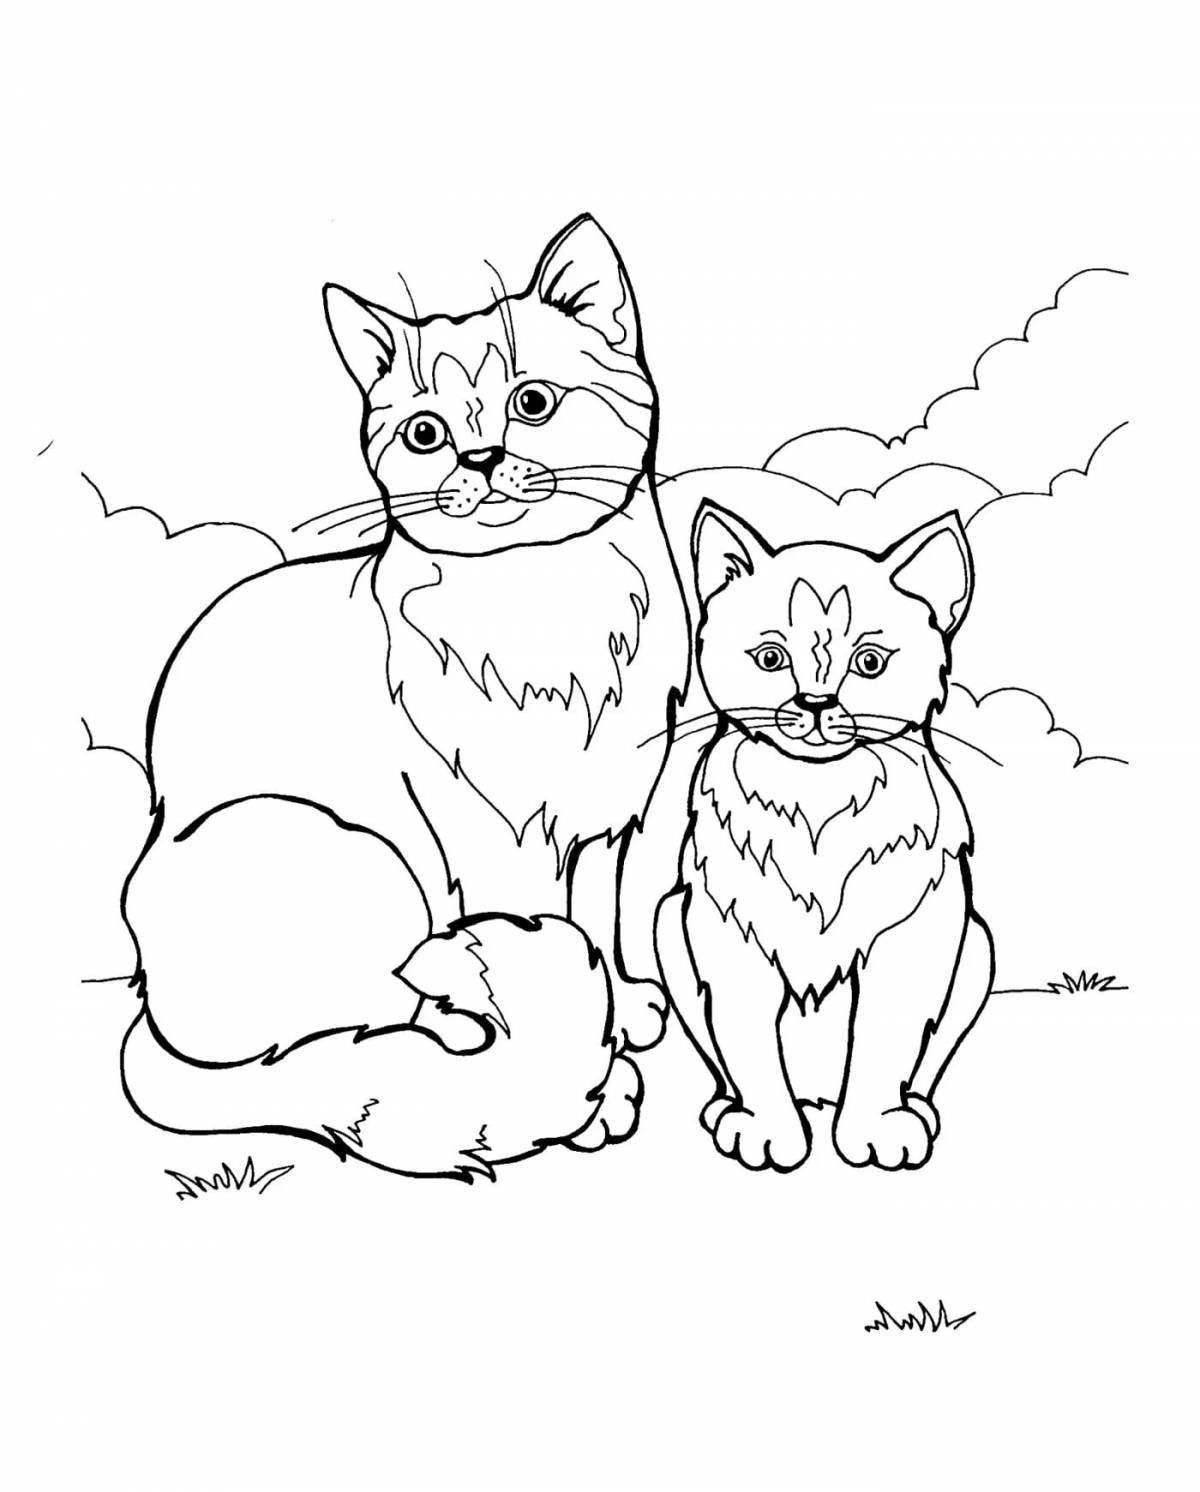 Cute cat coloring with kittens